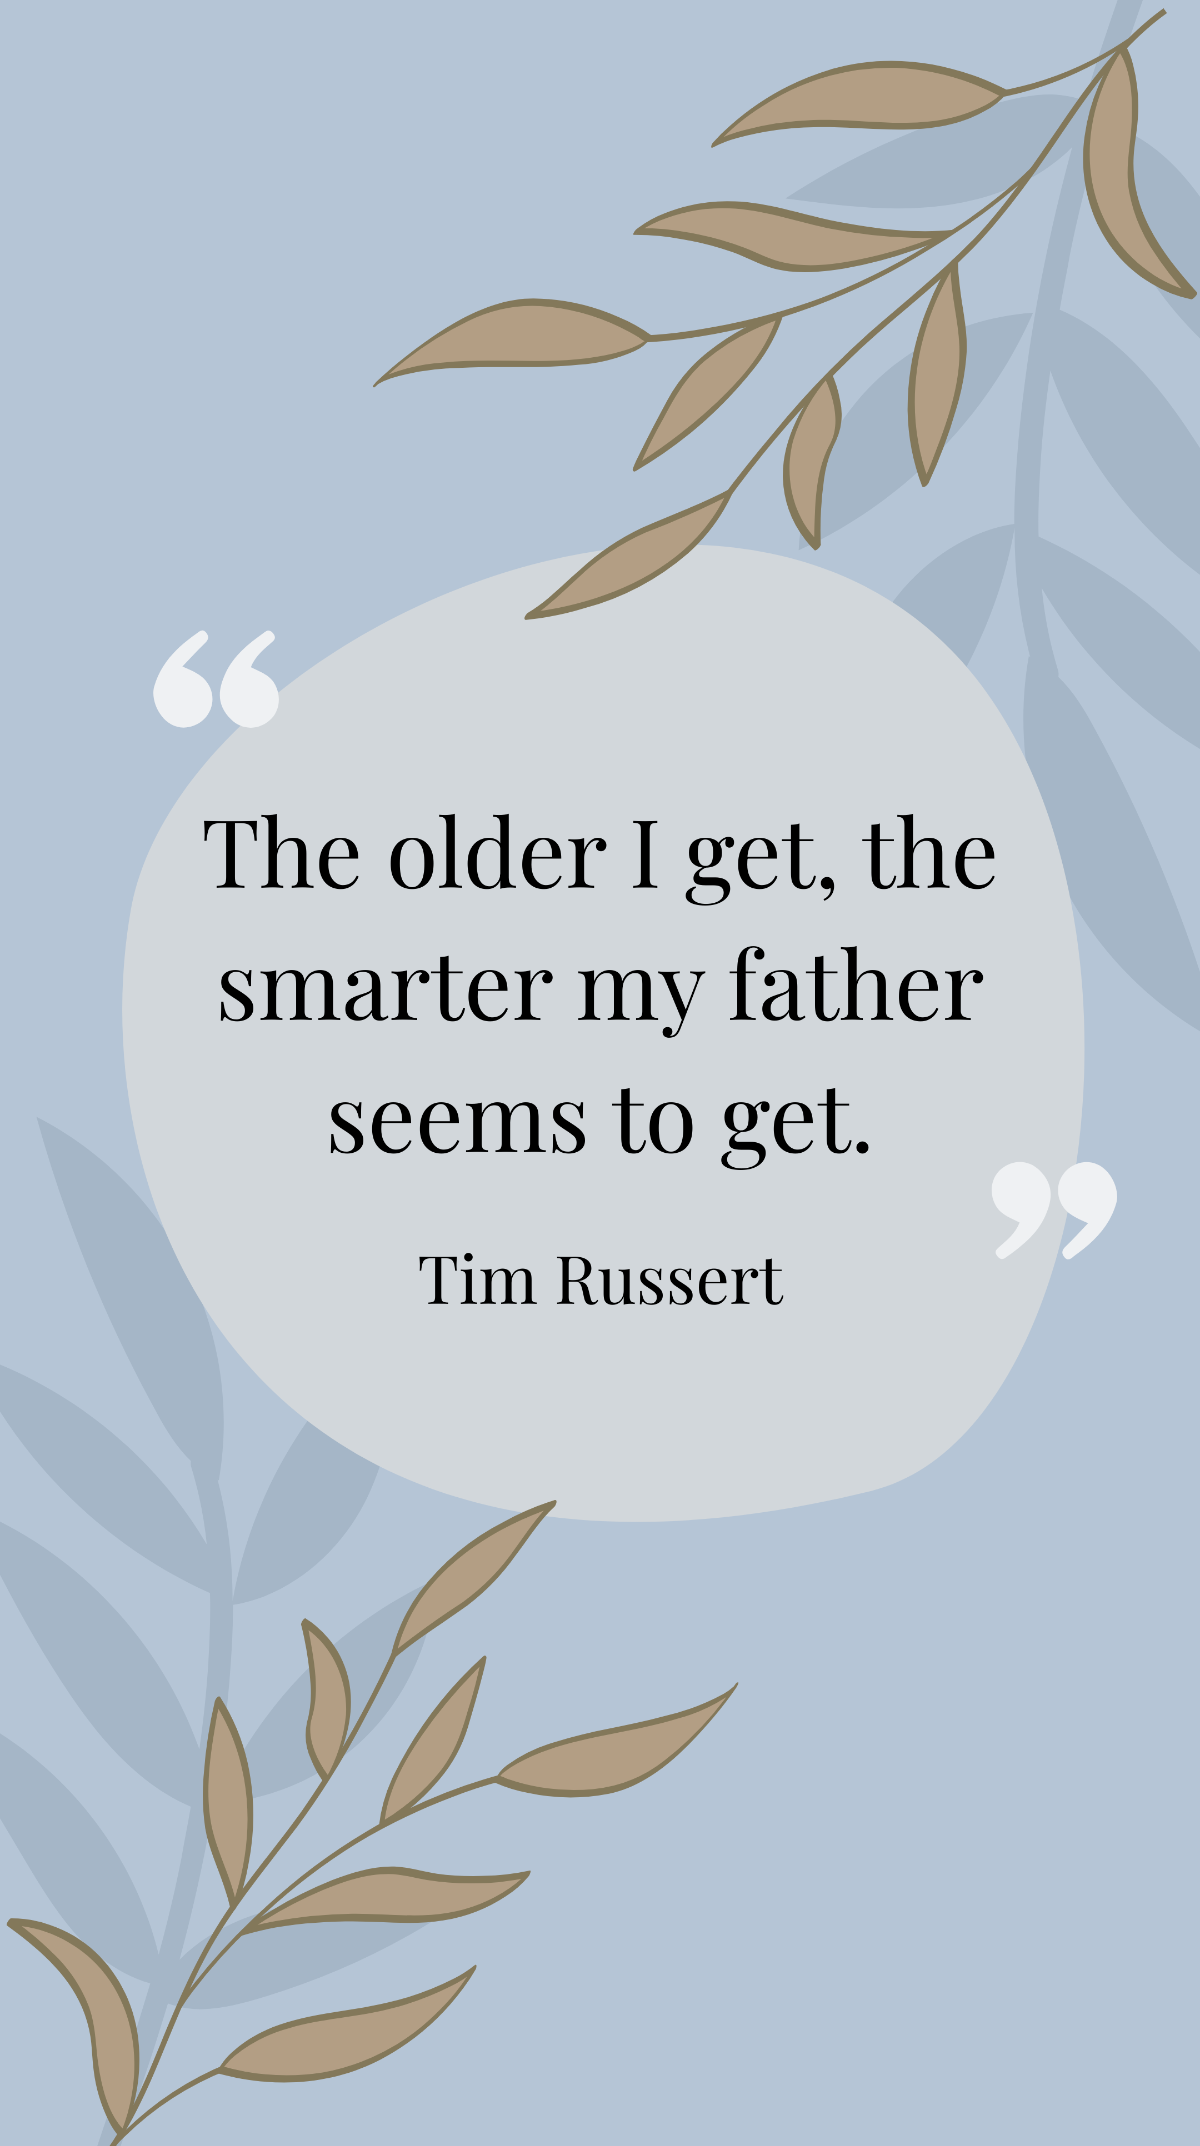 Tim Russert - “The older I get, the smarter my father seems to get.” Template